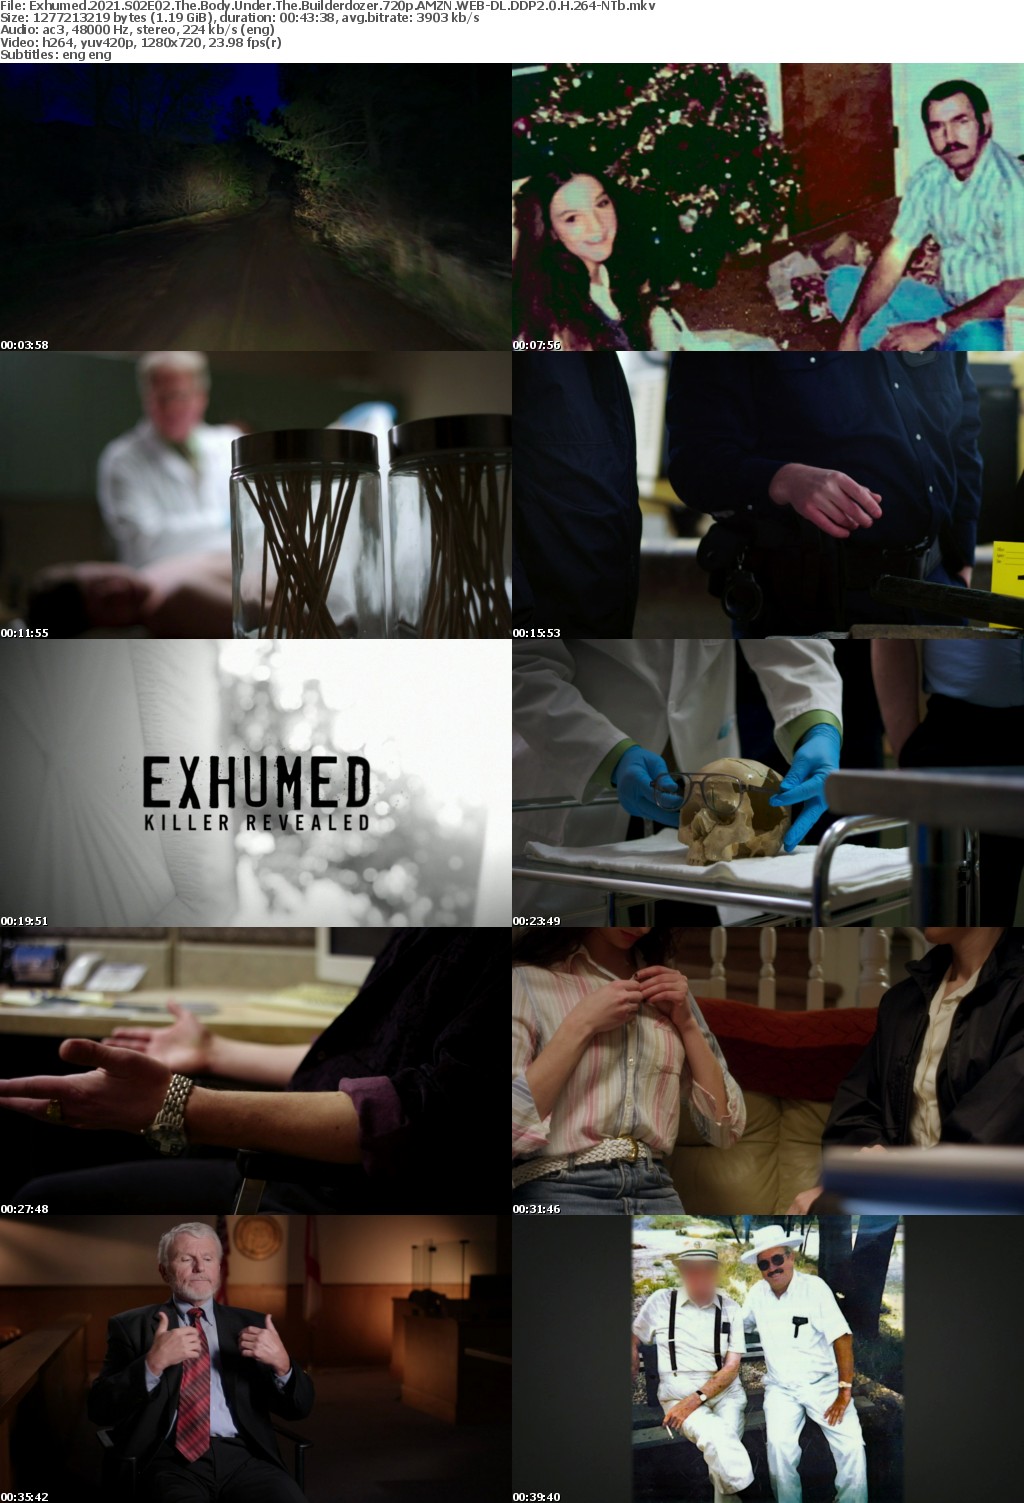 Exhumed 2021 S02E02 The Body Under The Builderdozer 720p AMZN WEBRip DDP2 0 x264-NTb